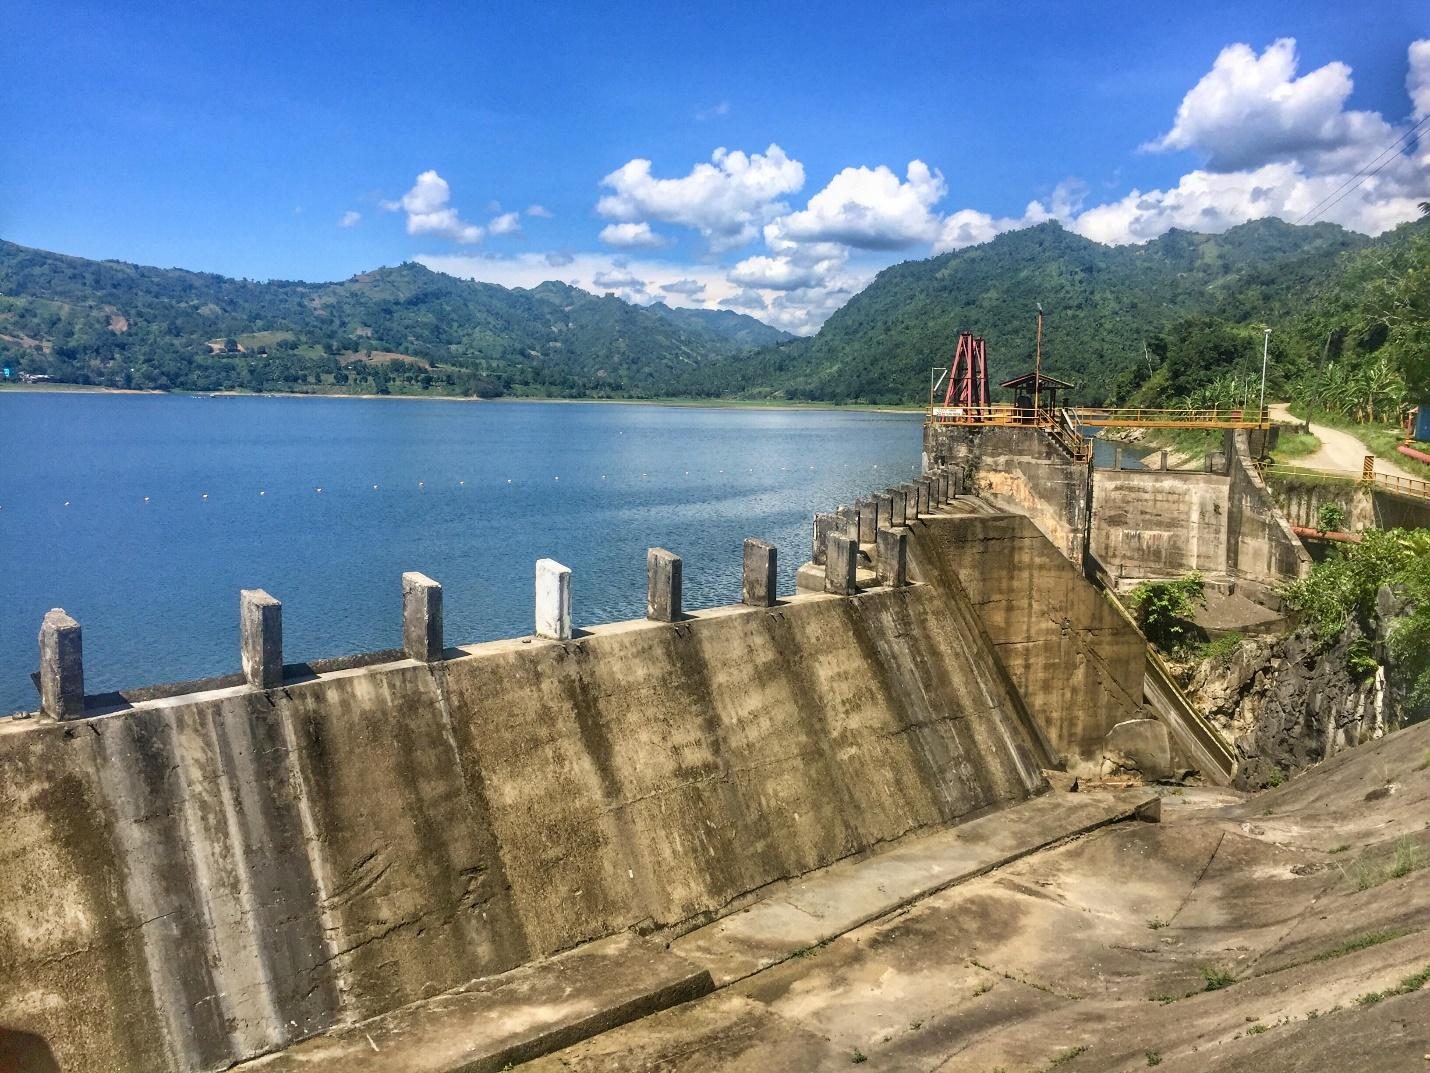 INFRASTRUCTURE. The Buhisan Dam in Cebu, a key source of water for the province. Photo by Sarah Hartman 